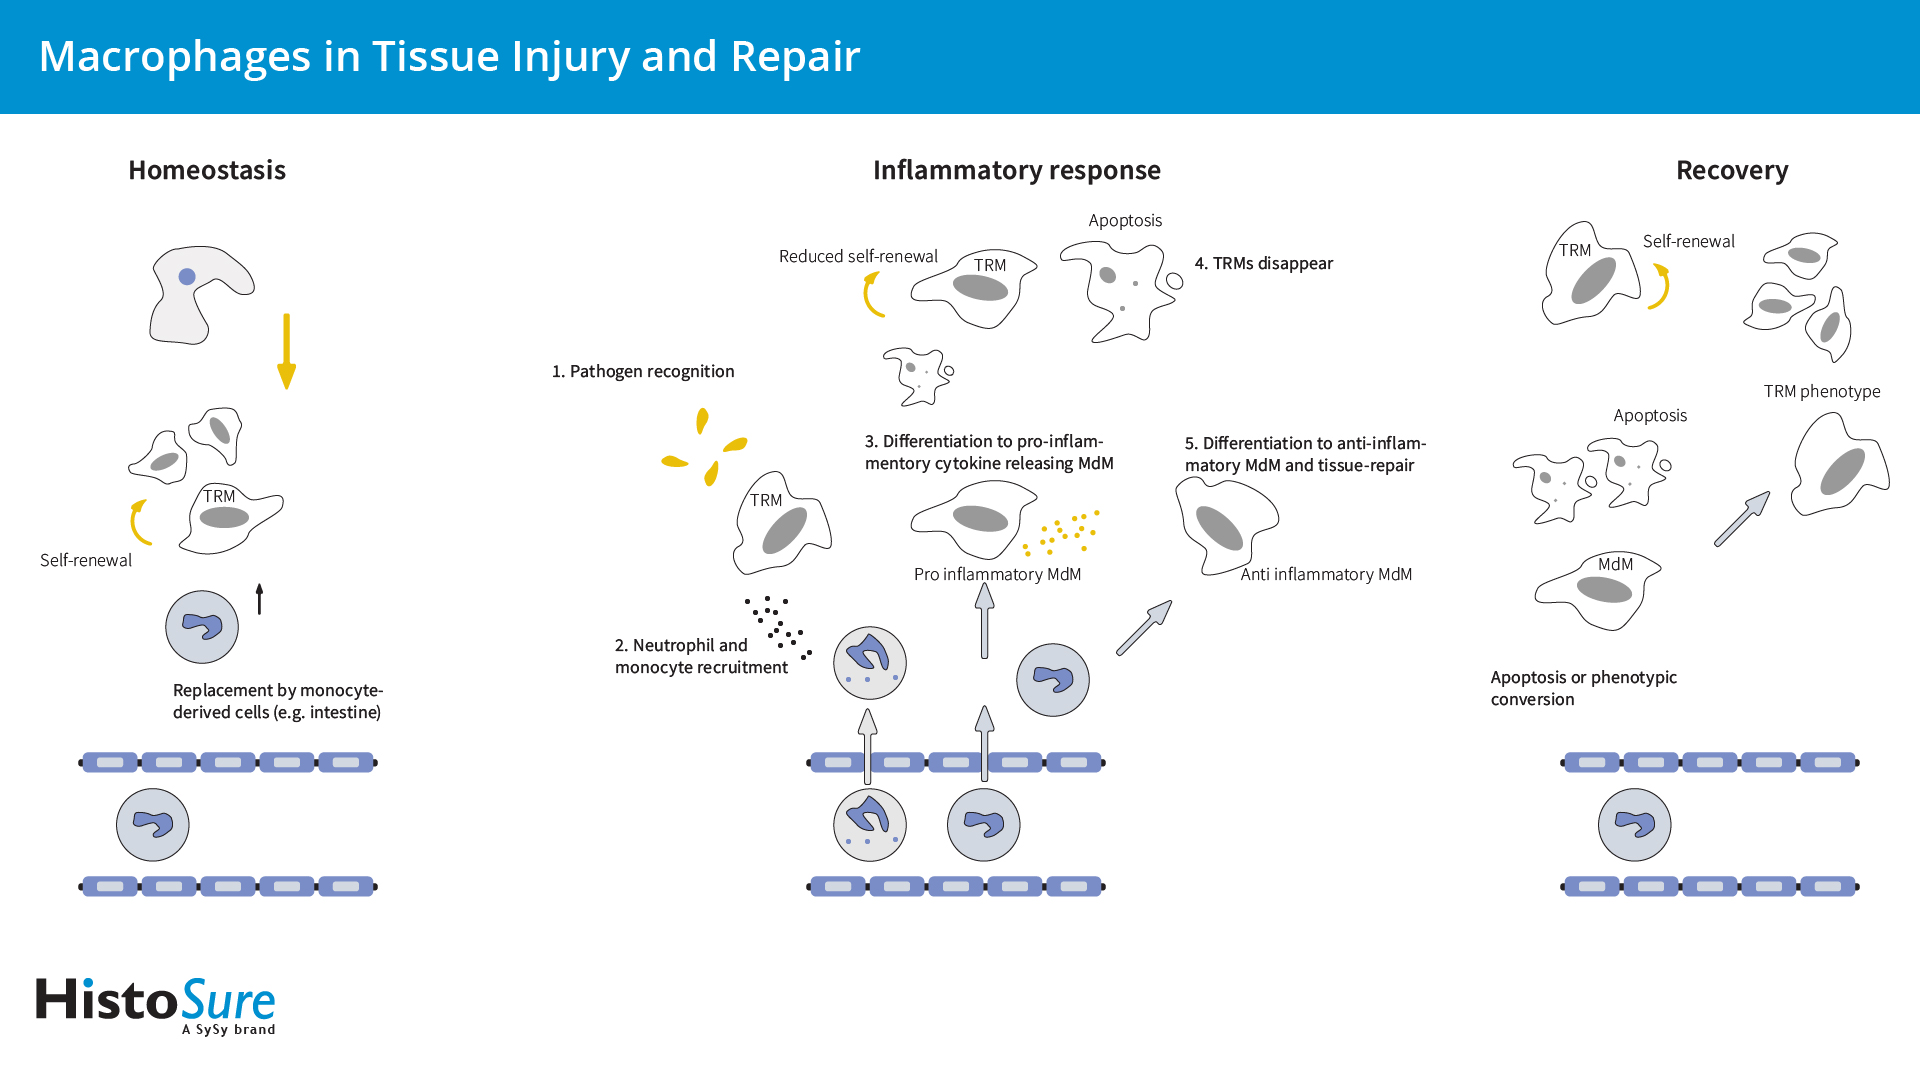 Info graphic on tissue-resident macrophages and monocyte-derived macrophages made in Illustrator to depict Homeostasis, Inflammatory Response and Recovery.